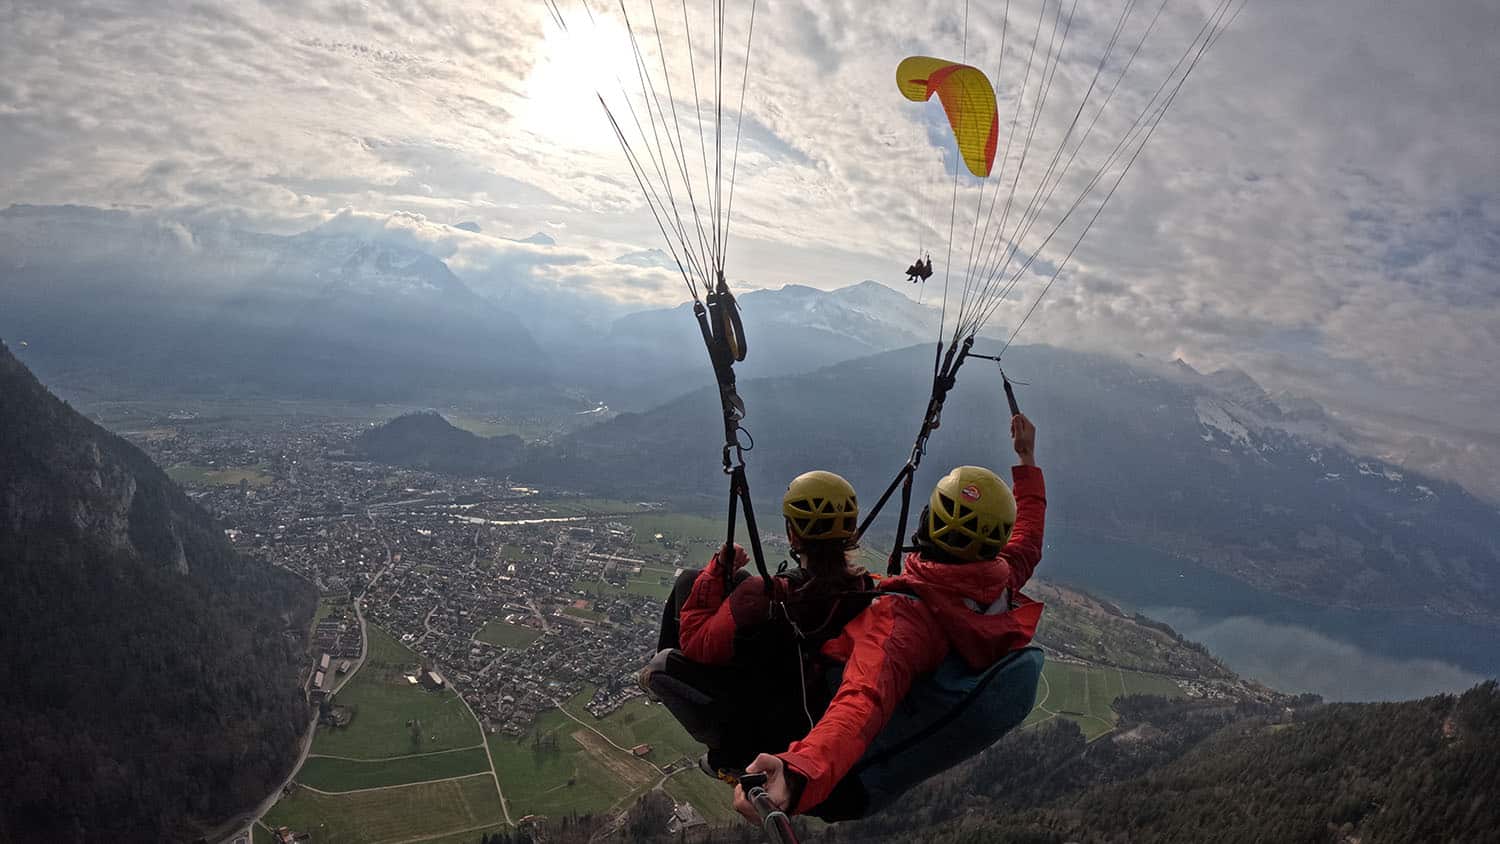 An NC State student studying abroad enjoys a guided paragliding outing over Switzerland.